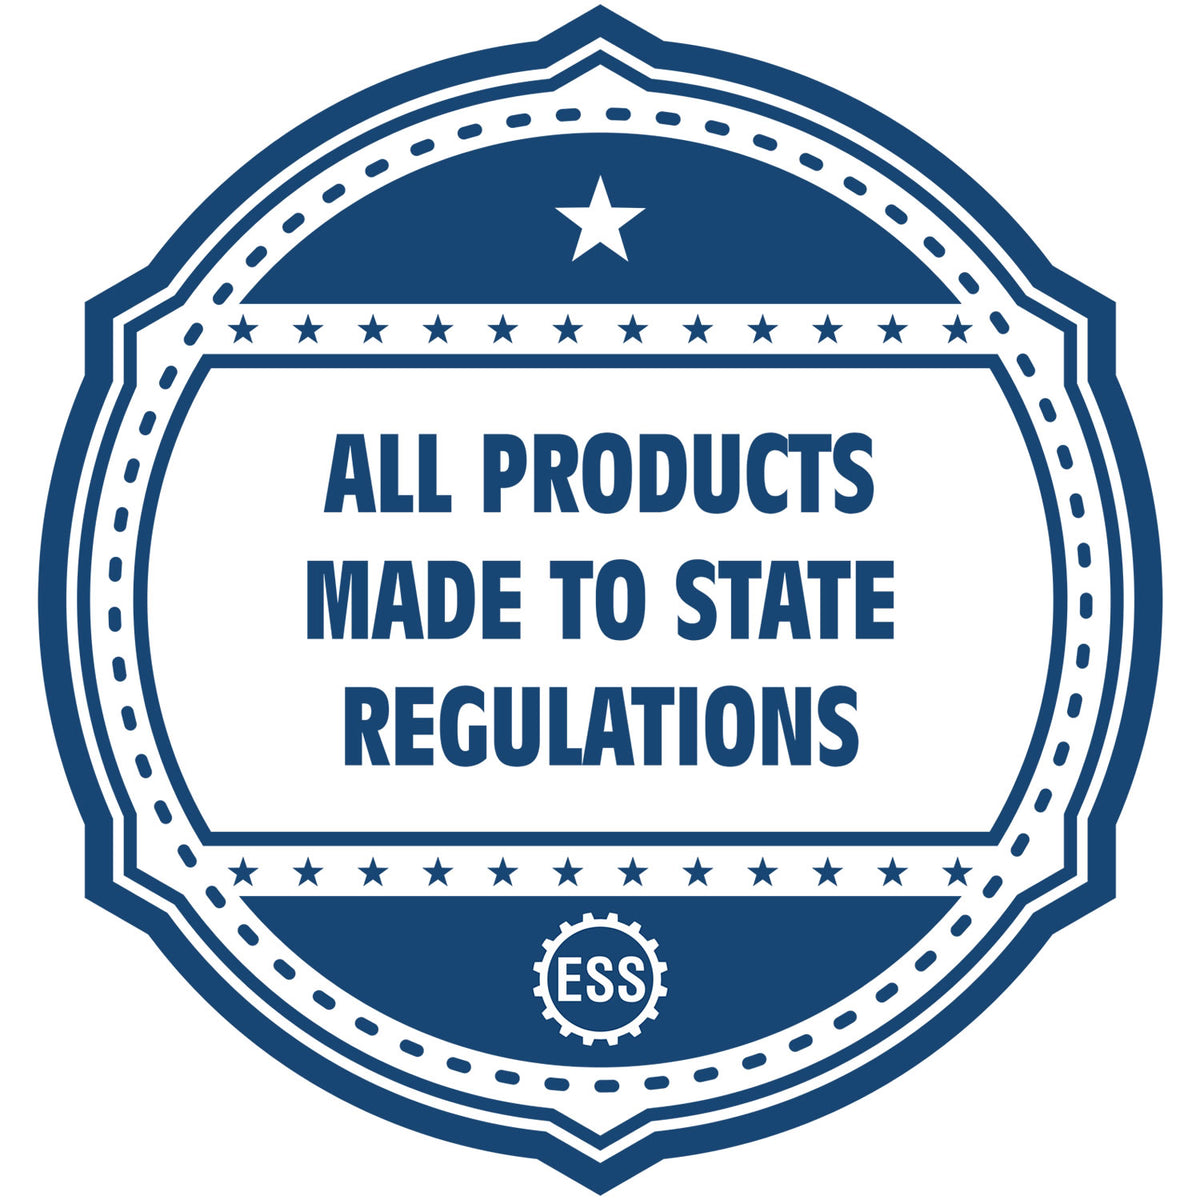 A blue icon or badge for the Gift Tennessee Engineer Seal showing that this product is made in compliance with state regulations.